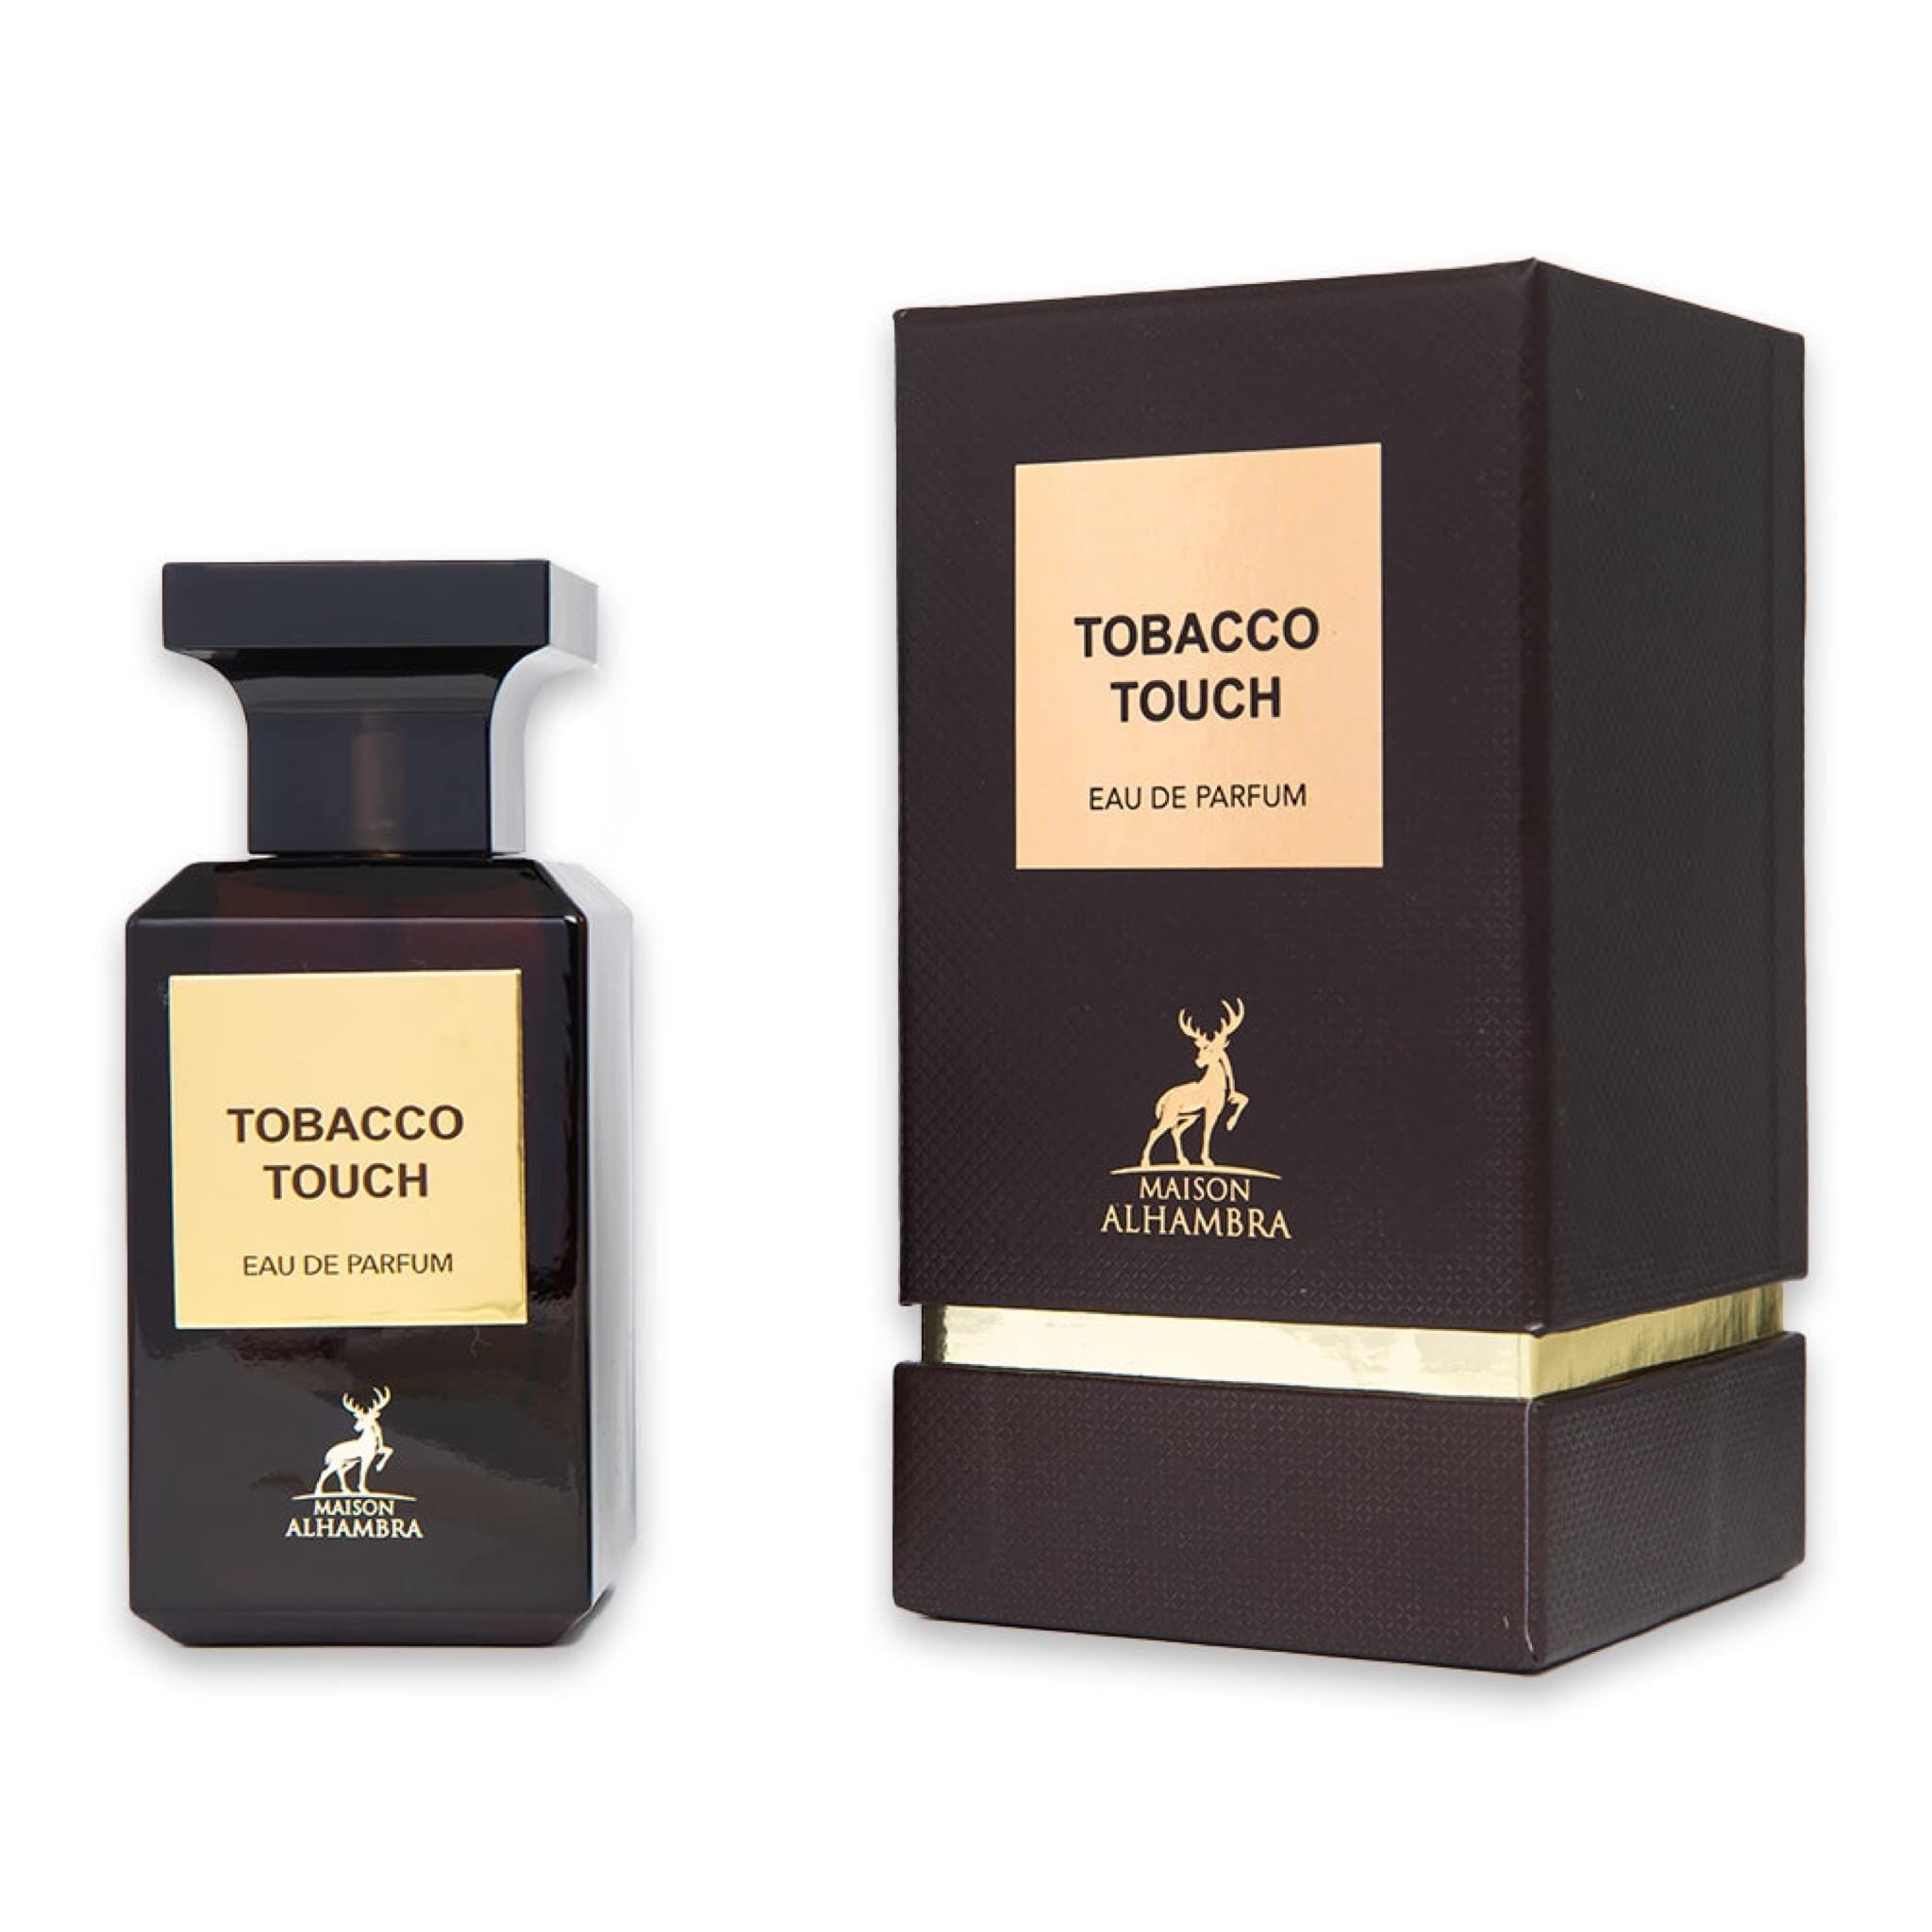 TOBACCO TOUCH 80ml